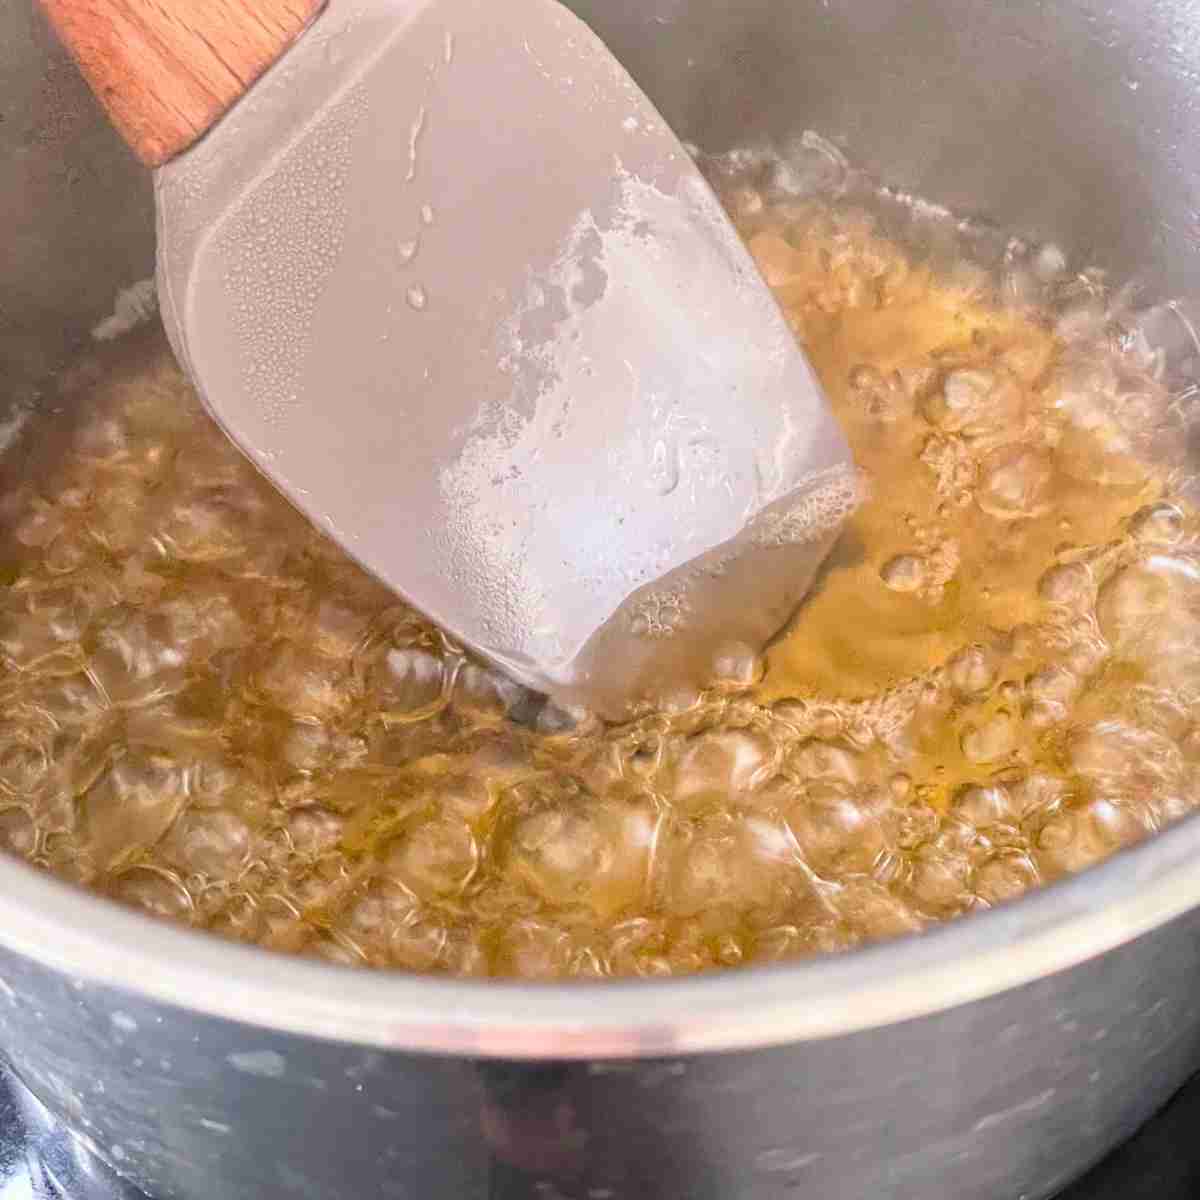 Making tapioca syrup at home